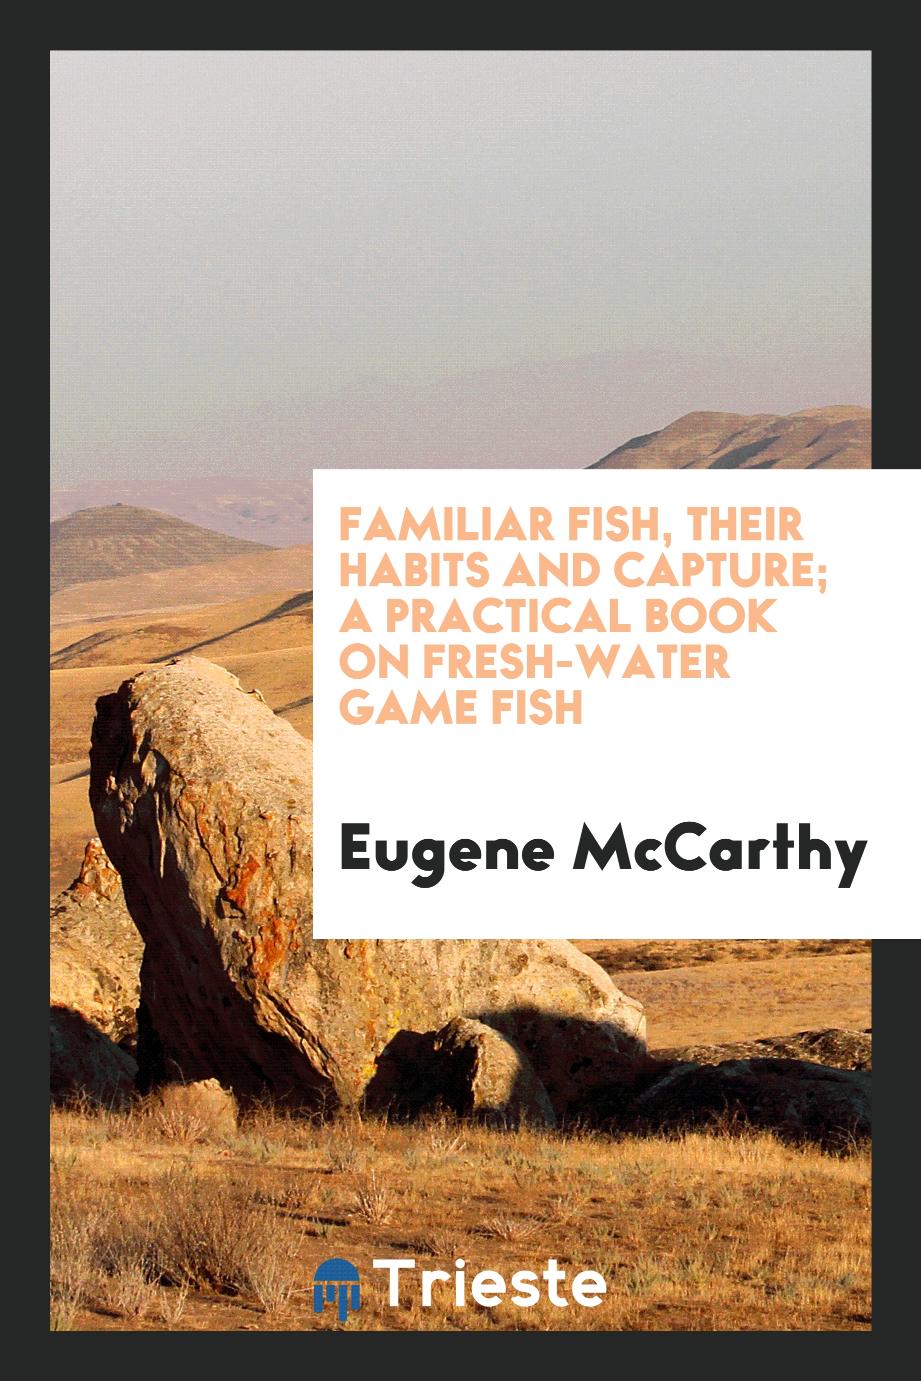 Familiar fish, their habits and capture; a practical book on fresh-water game fish